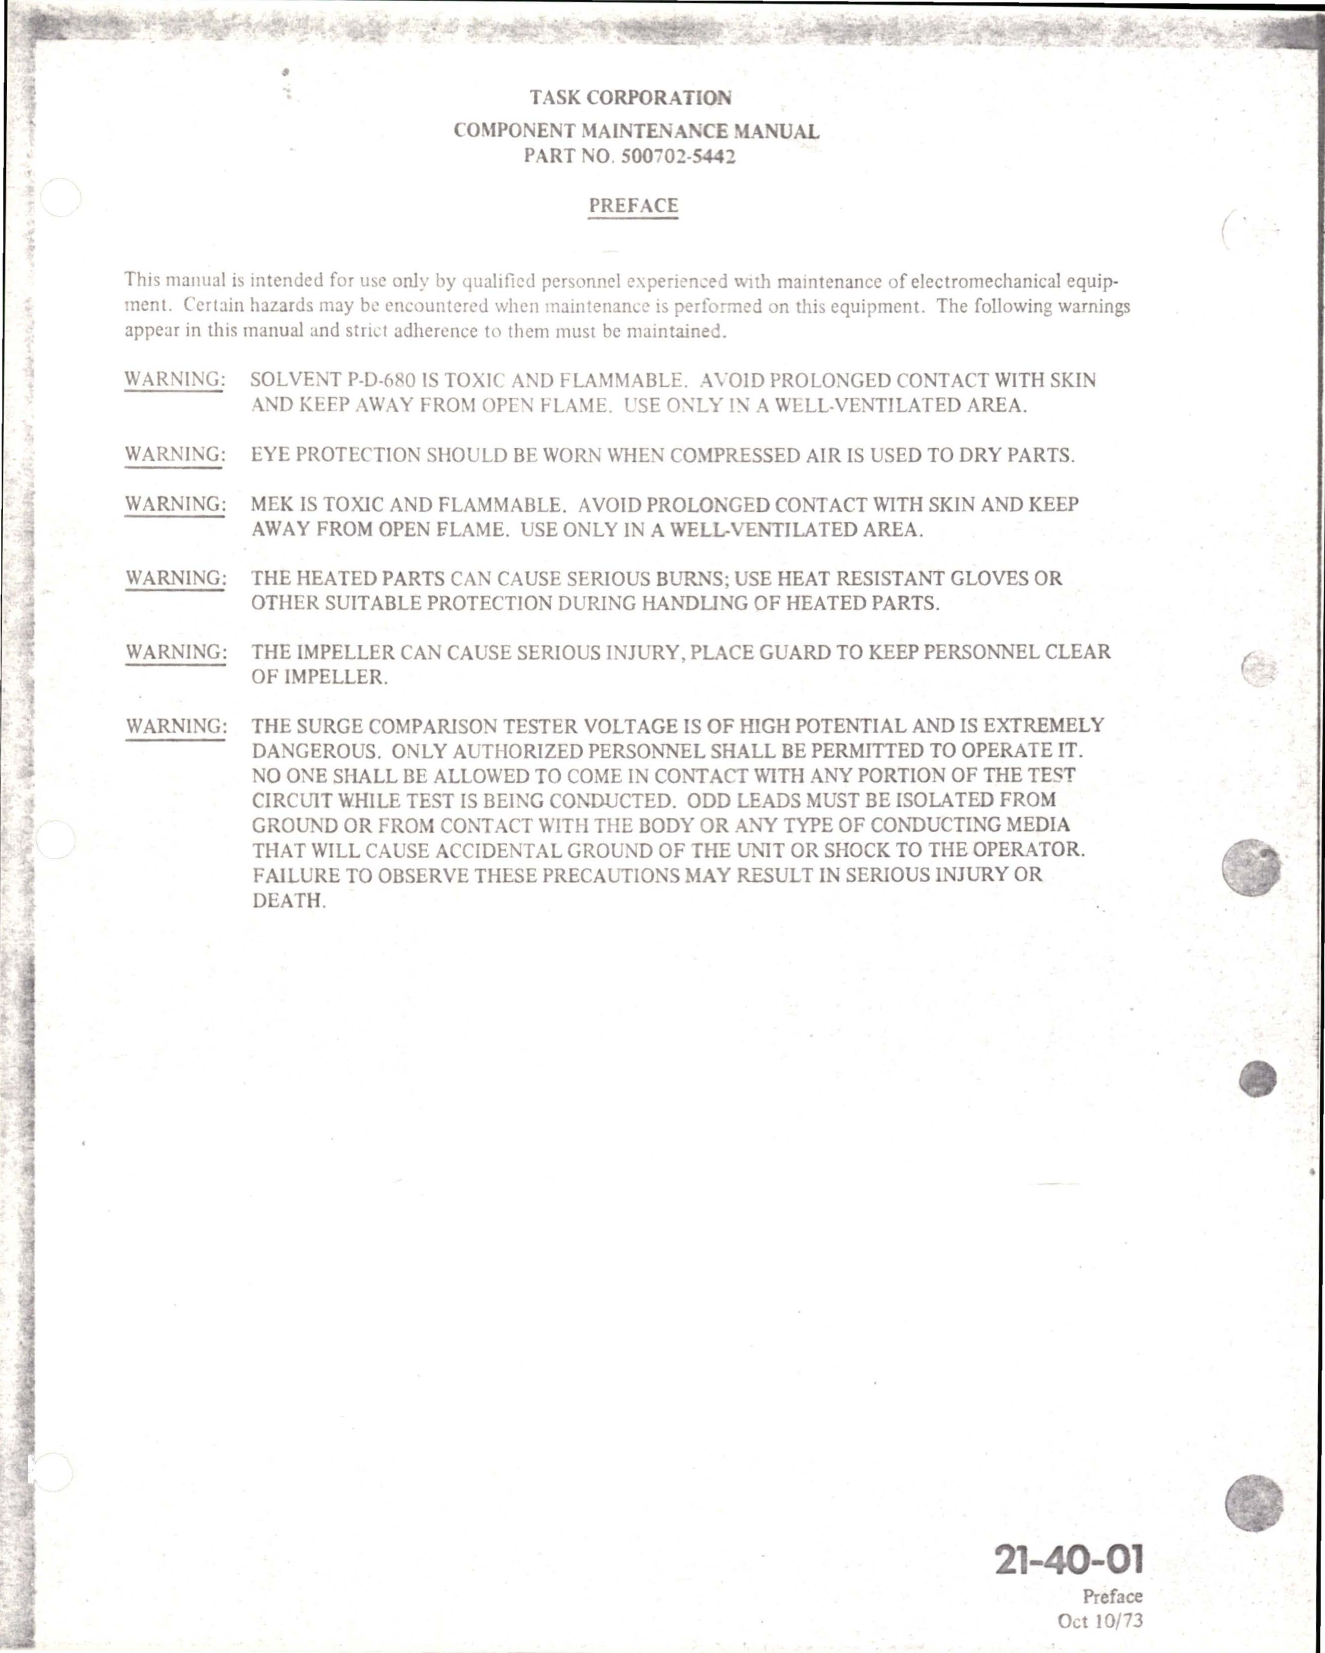 Sample page 7 from AirCorps Library document: Maintenance Manual with Illustrated Parts List for Axivane Fan - Part 500702-5442 